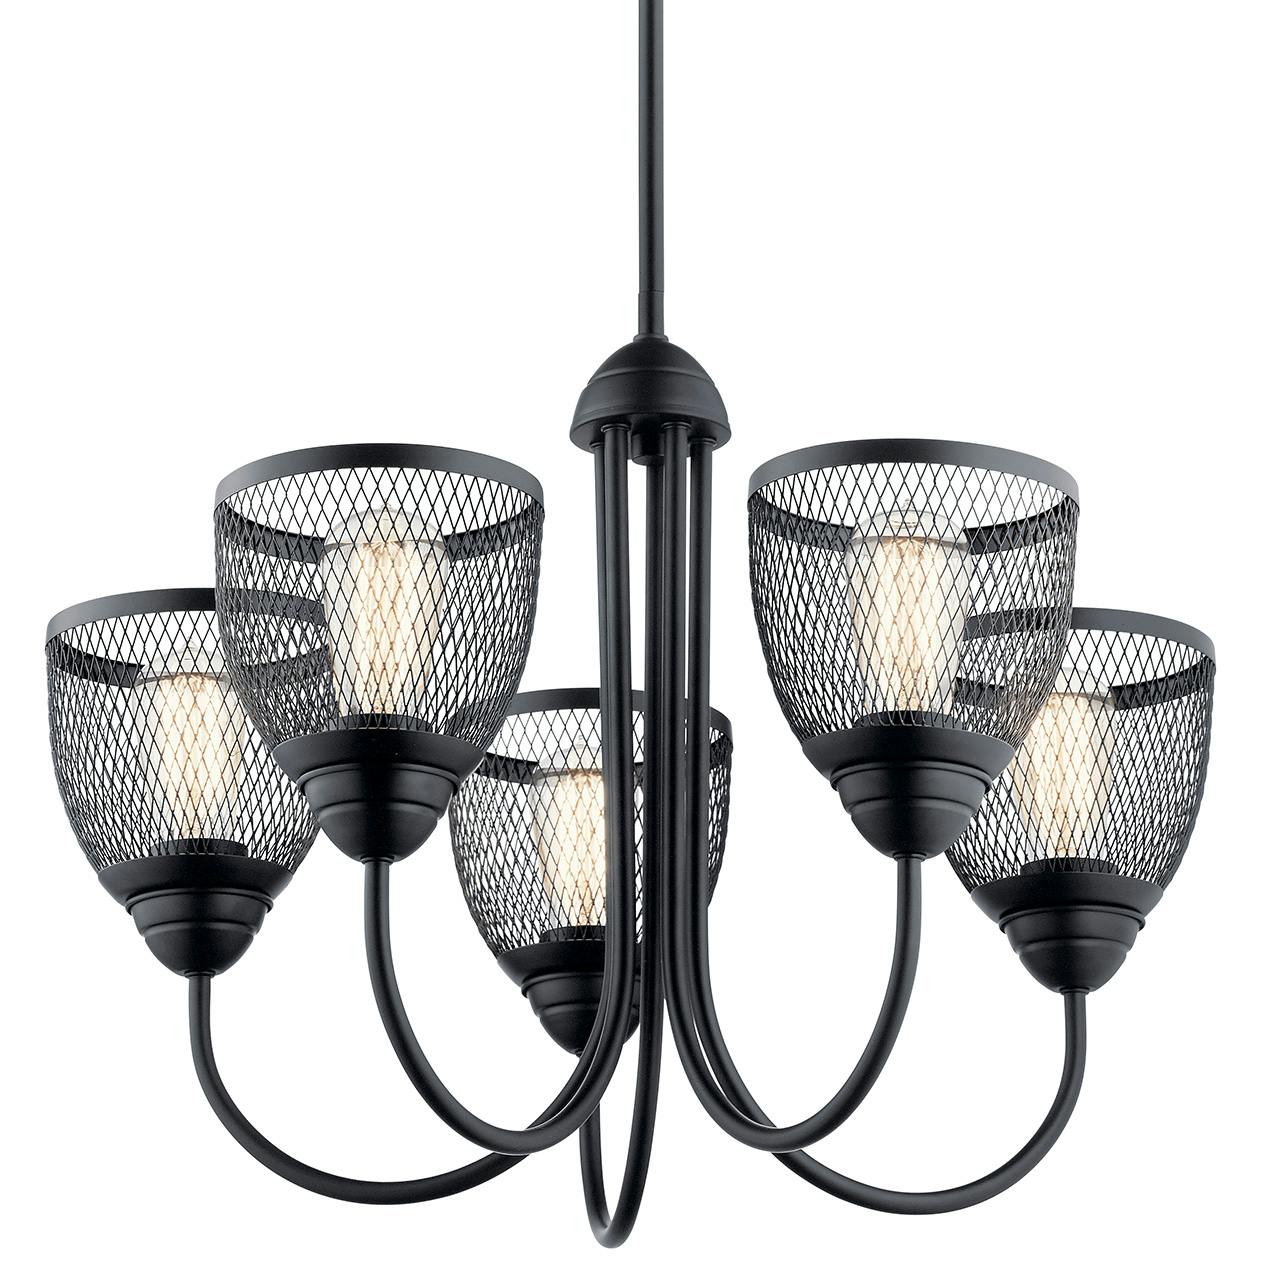 Voclain 17.5" Chandelier in Black without the canopy on a white background